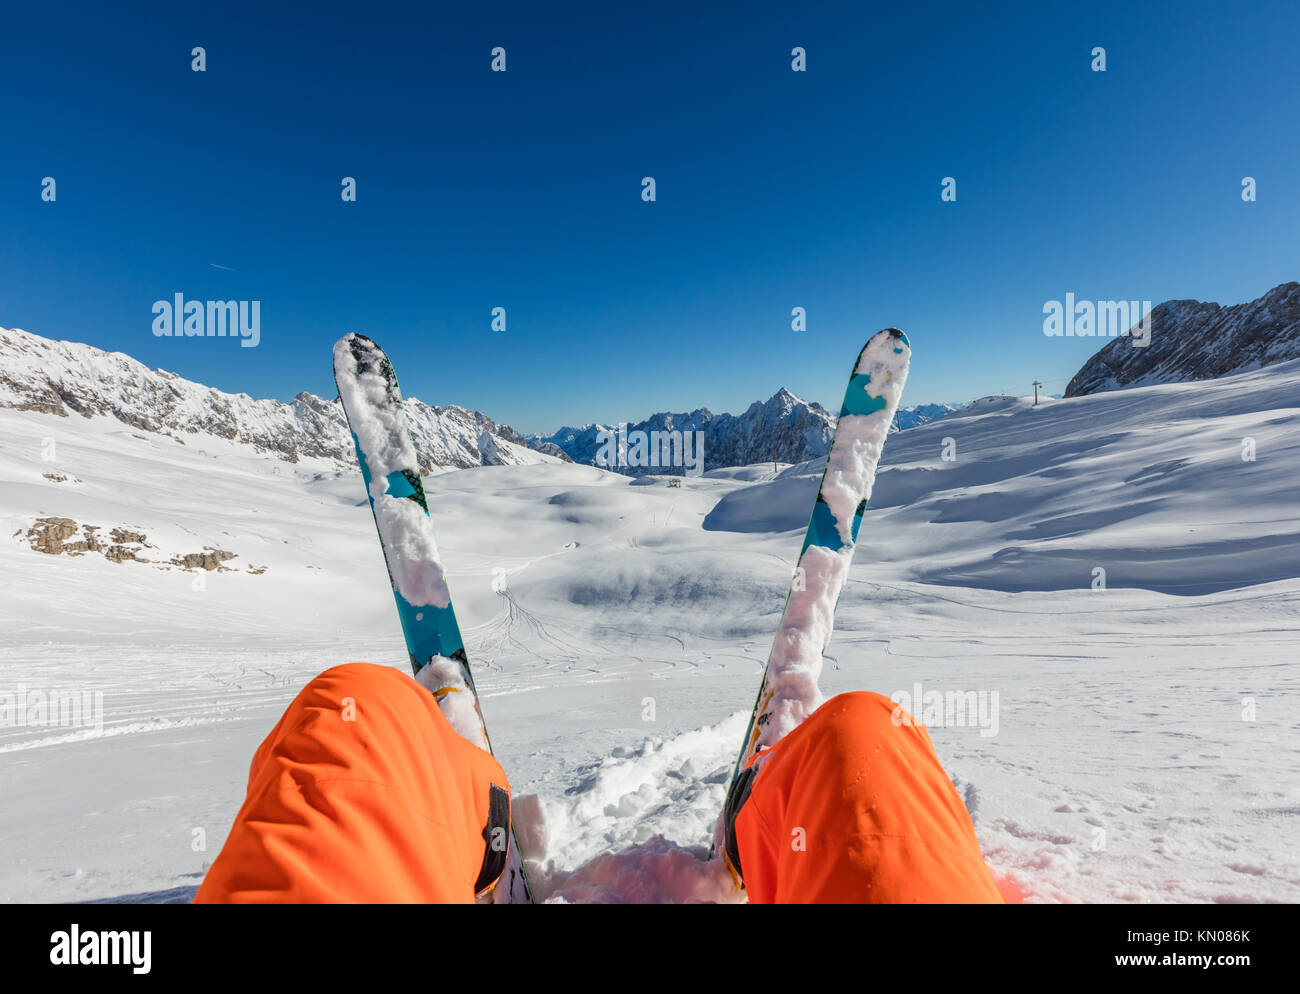 Skier sitting in powder snow, watching Alpine scenery. Winter activities and sports, outdoor scenery Stock Photo